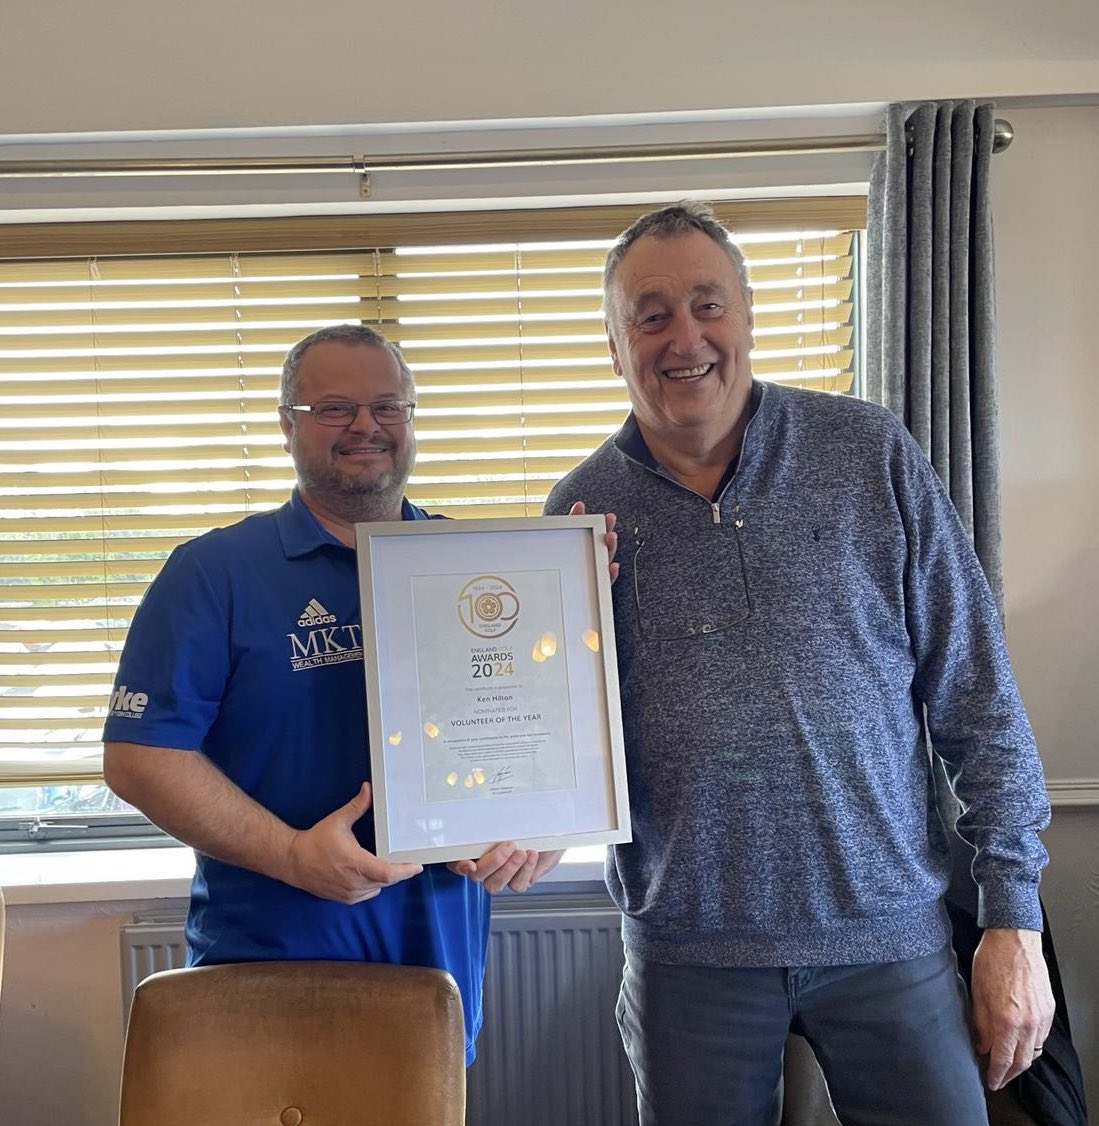 Before play we presented our very own living legend Ken Hilton (Mr JDP) with his volunteer nomination certificate from @EnglandGolf This man is beyond dedicated & we thank him for all he does for the Juniors! @CottinghamParks @YUGCUK @erugc @YORKSHIREGOLFER